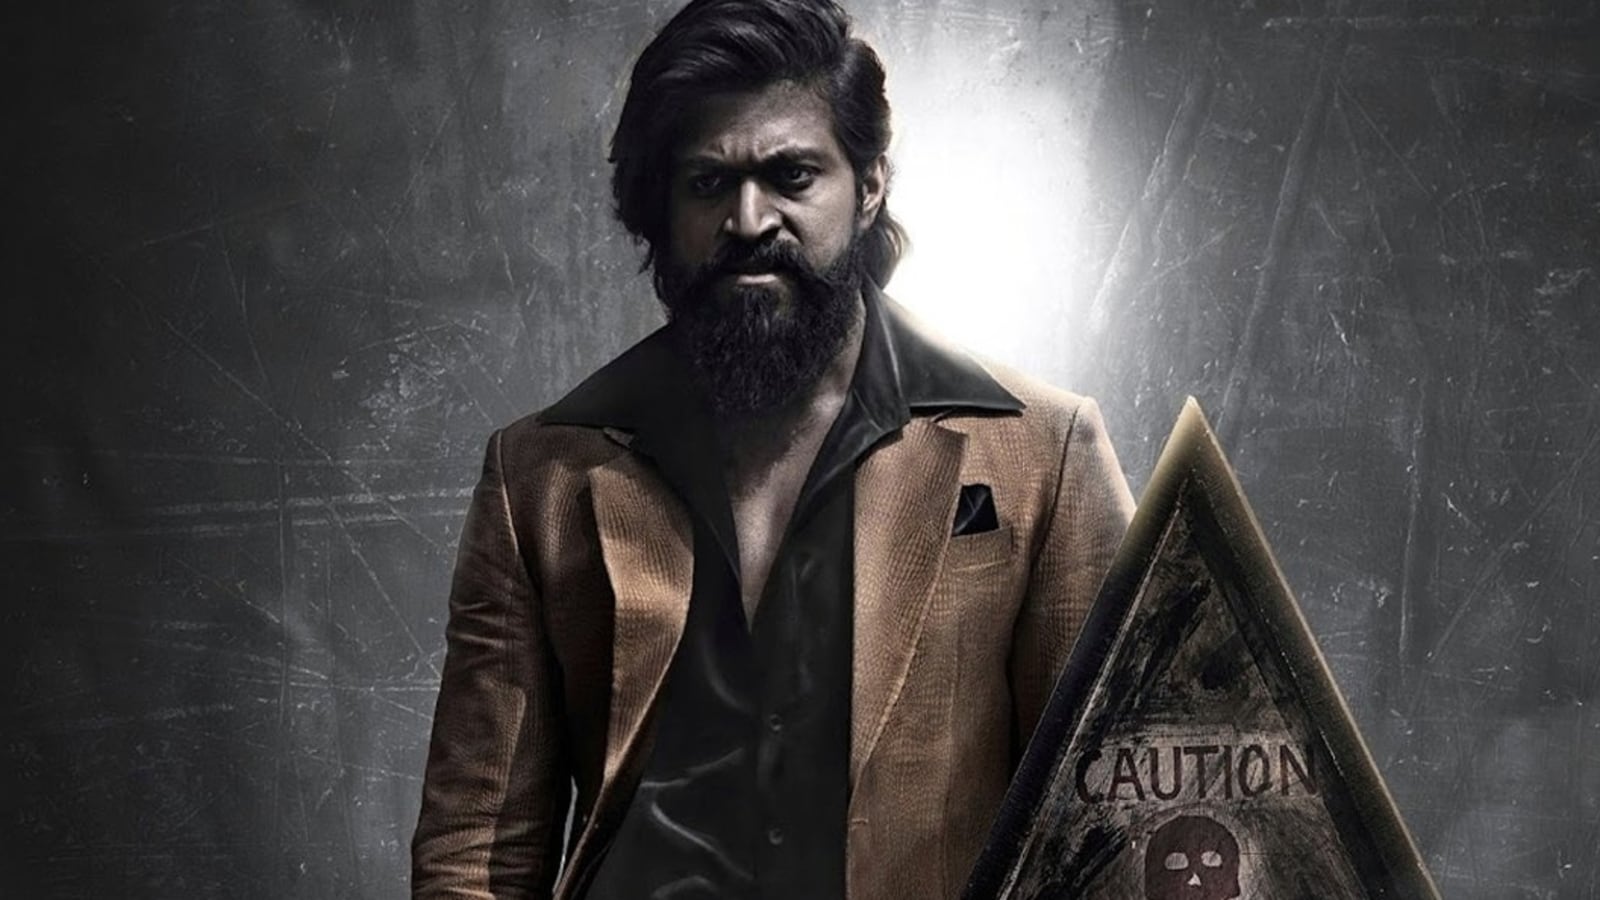 KGF Chapter 2 review: Yash’s film is an explosive tale of brash, unapologetic and larger-than-life characters